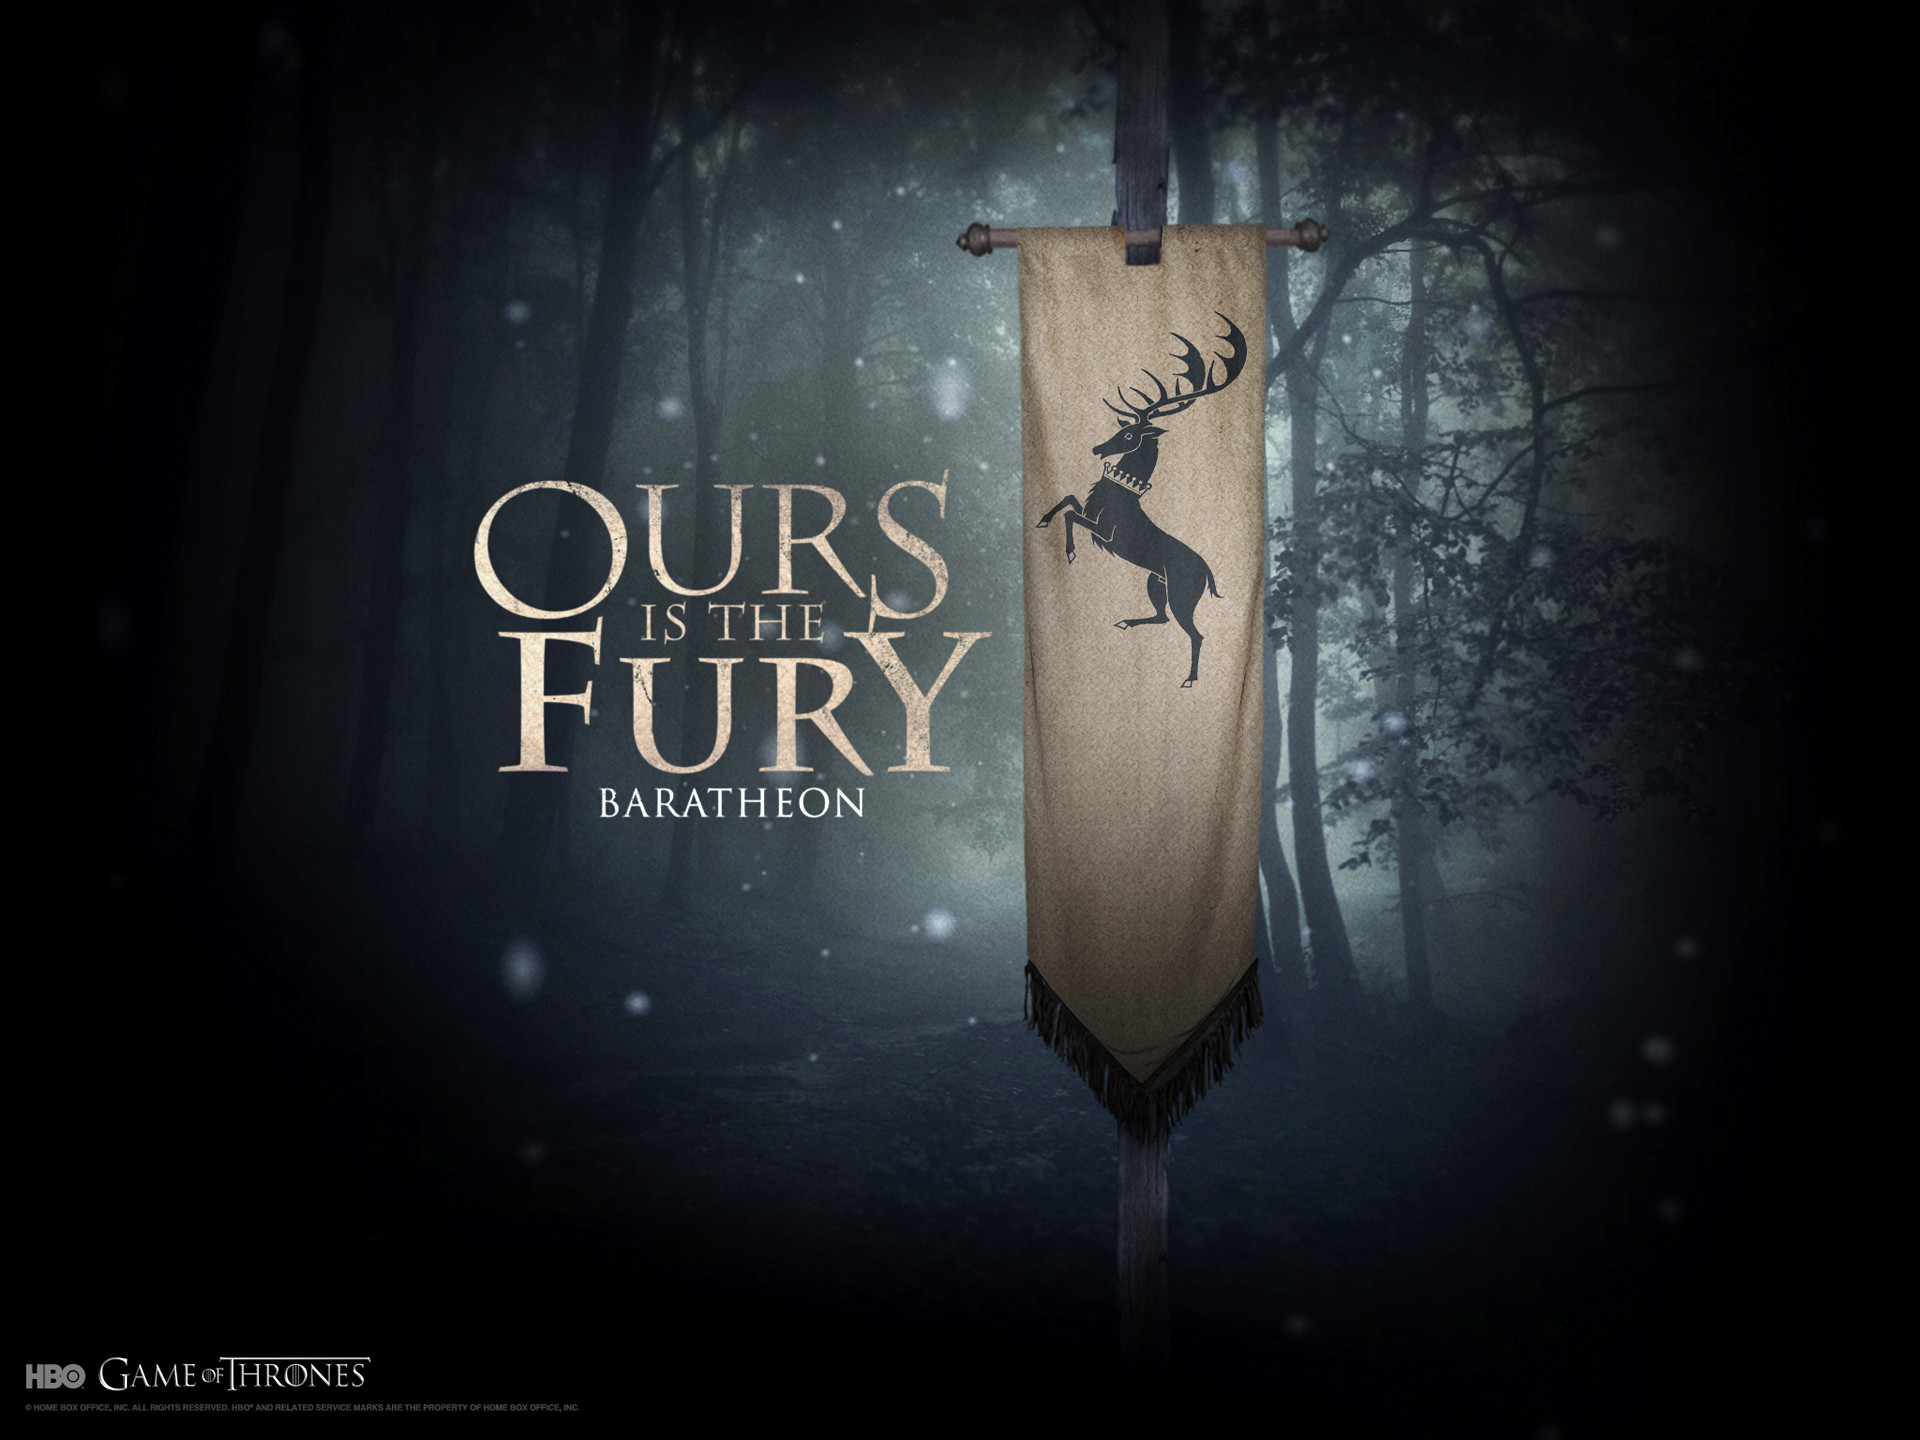 1920x1440 Game of Thrones A Song Of Ice And Fire sigil TV series Banner Stannis  Baratheon HBO George R. R. Mar wallpaper